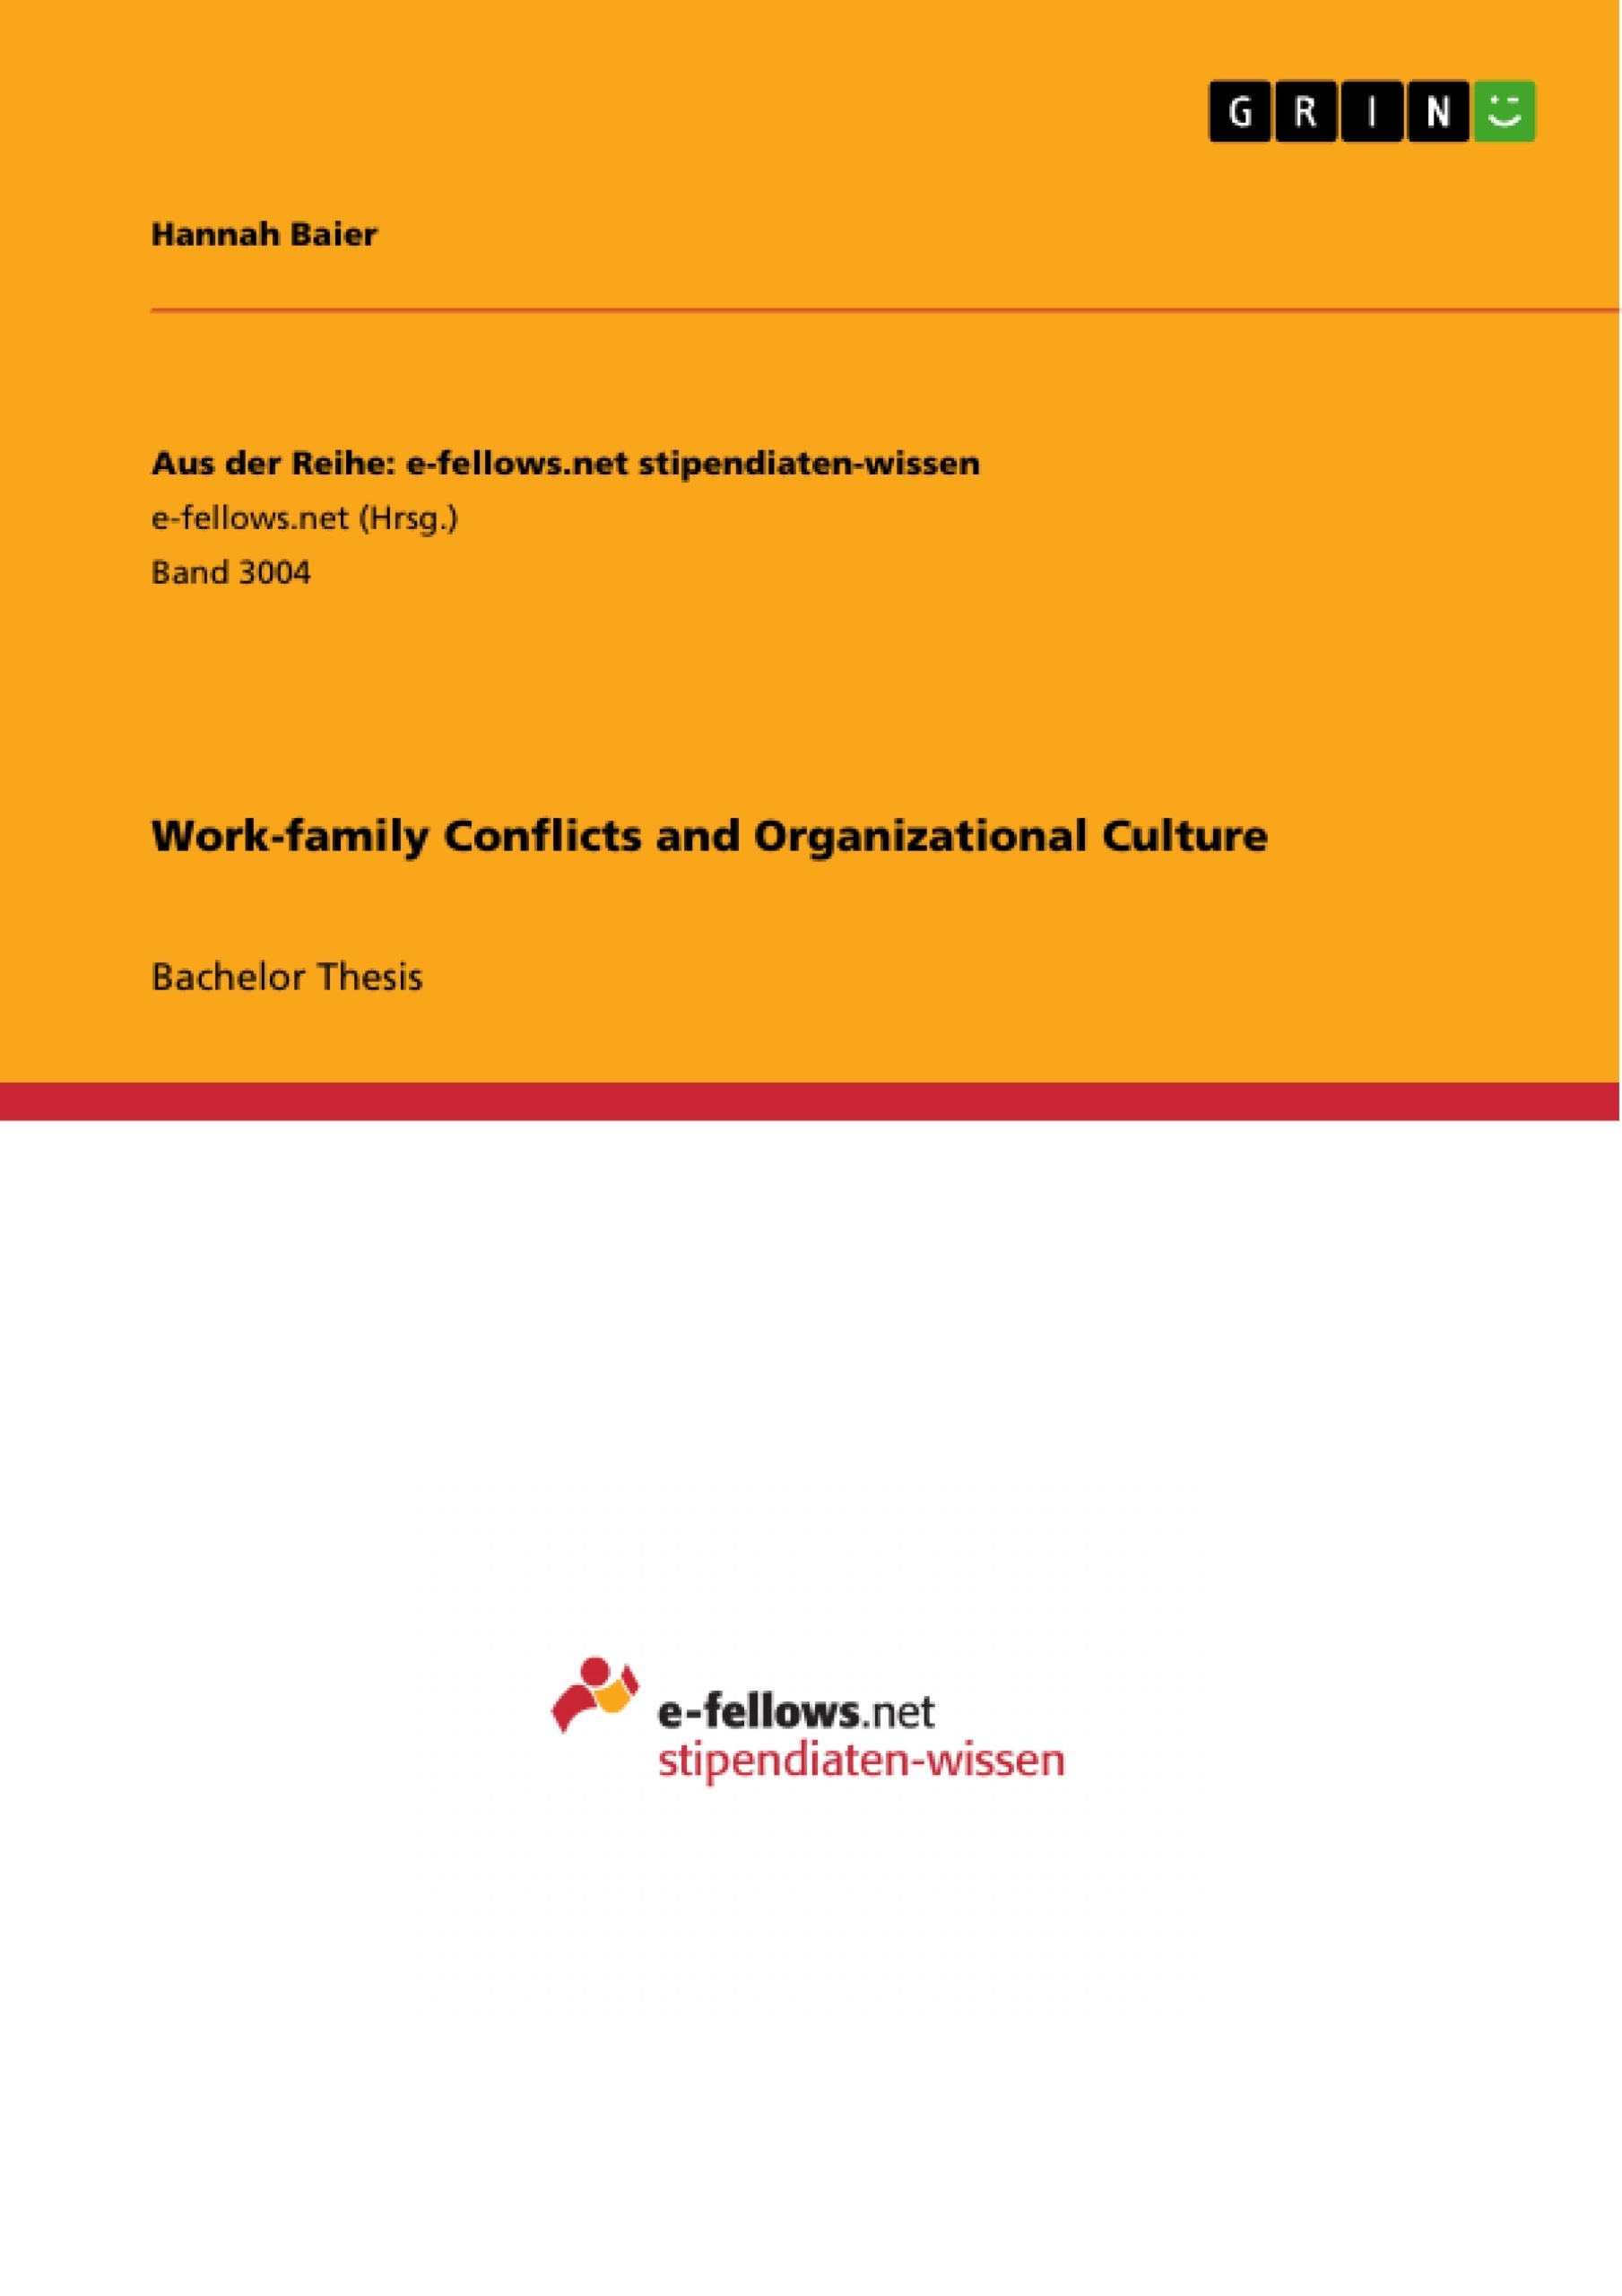 Title: Work-family Conflicts and Organizational Culture